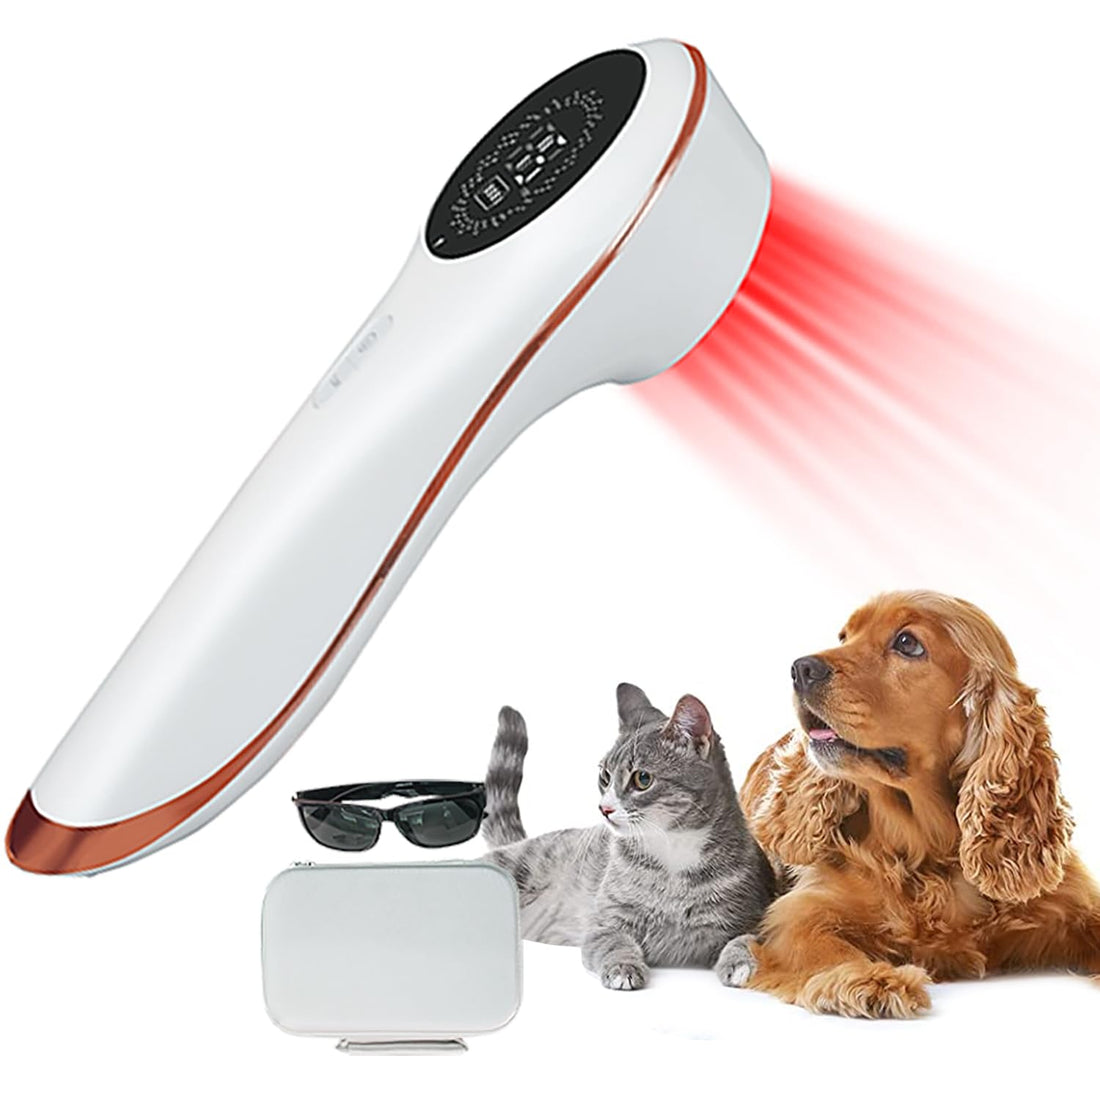 Cold Laser Therapy Device for Dogs, Portable Red Light Therapy Vet Device for Pain Relief, 3x808nm+13x650nm, Pet Laser Therapy, Accelerates Wound Healing and Reduces Inflammation in Dog, Cat, Horse